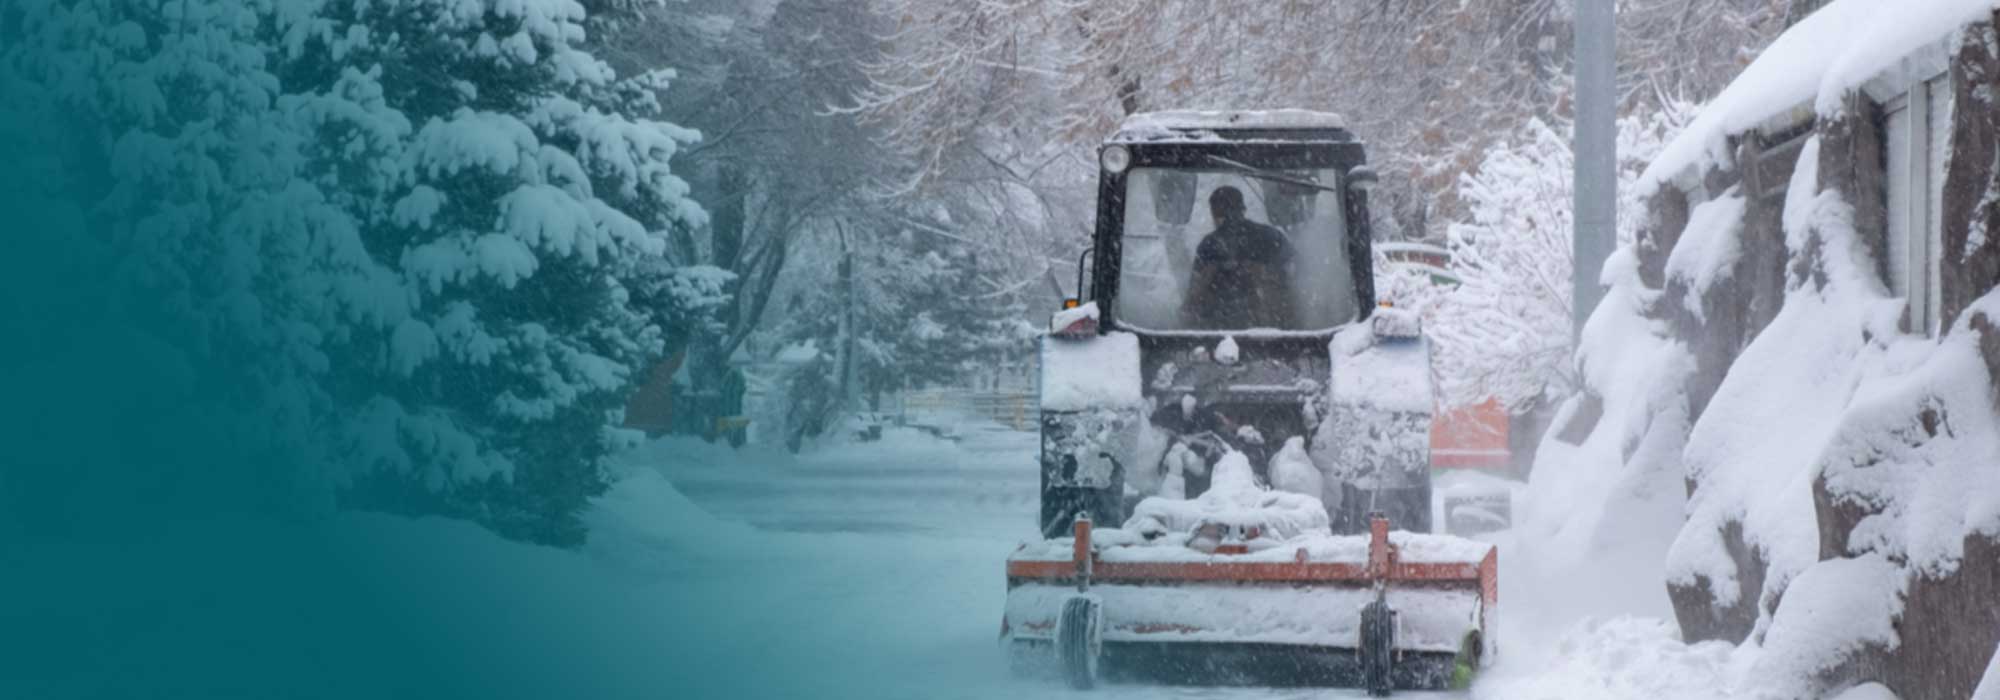 Snow Plowing Insurance Vermont